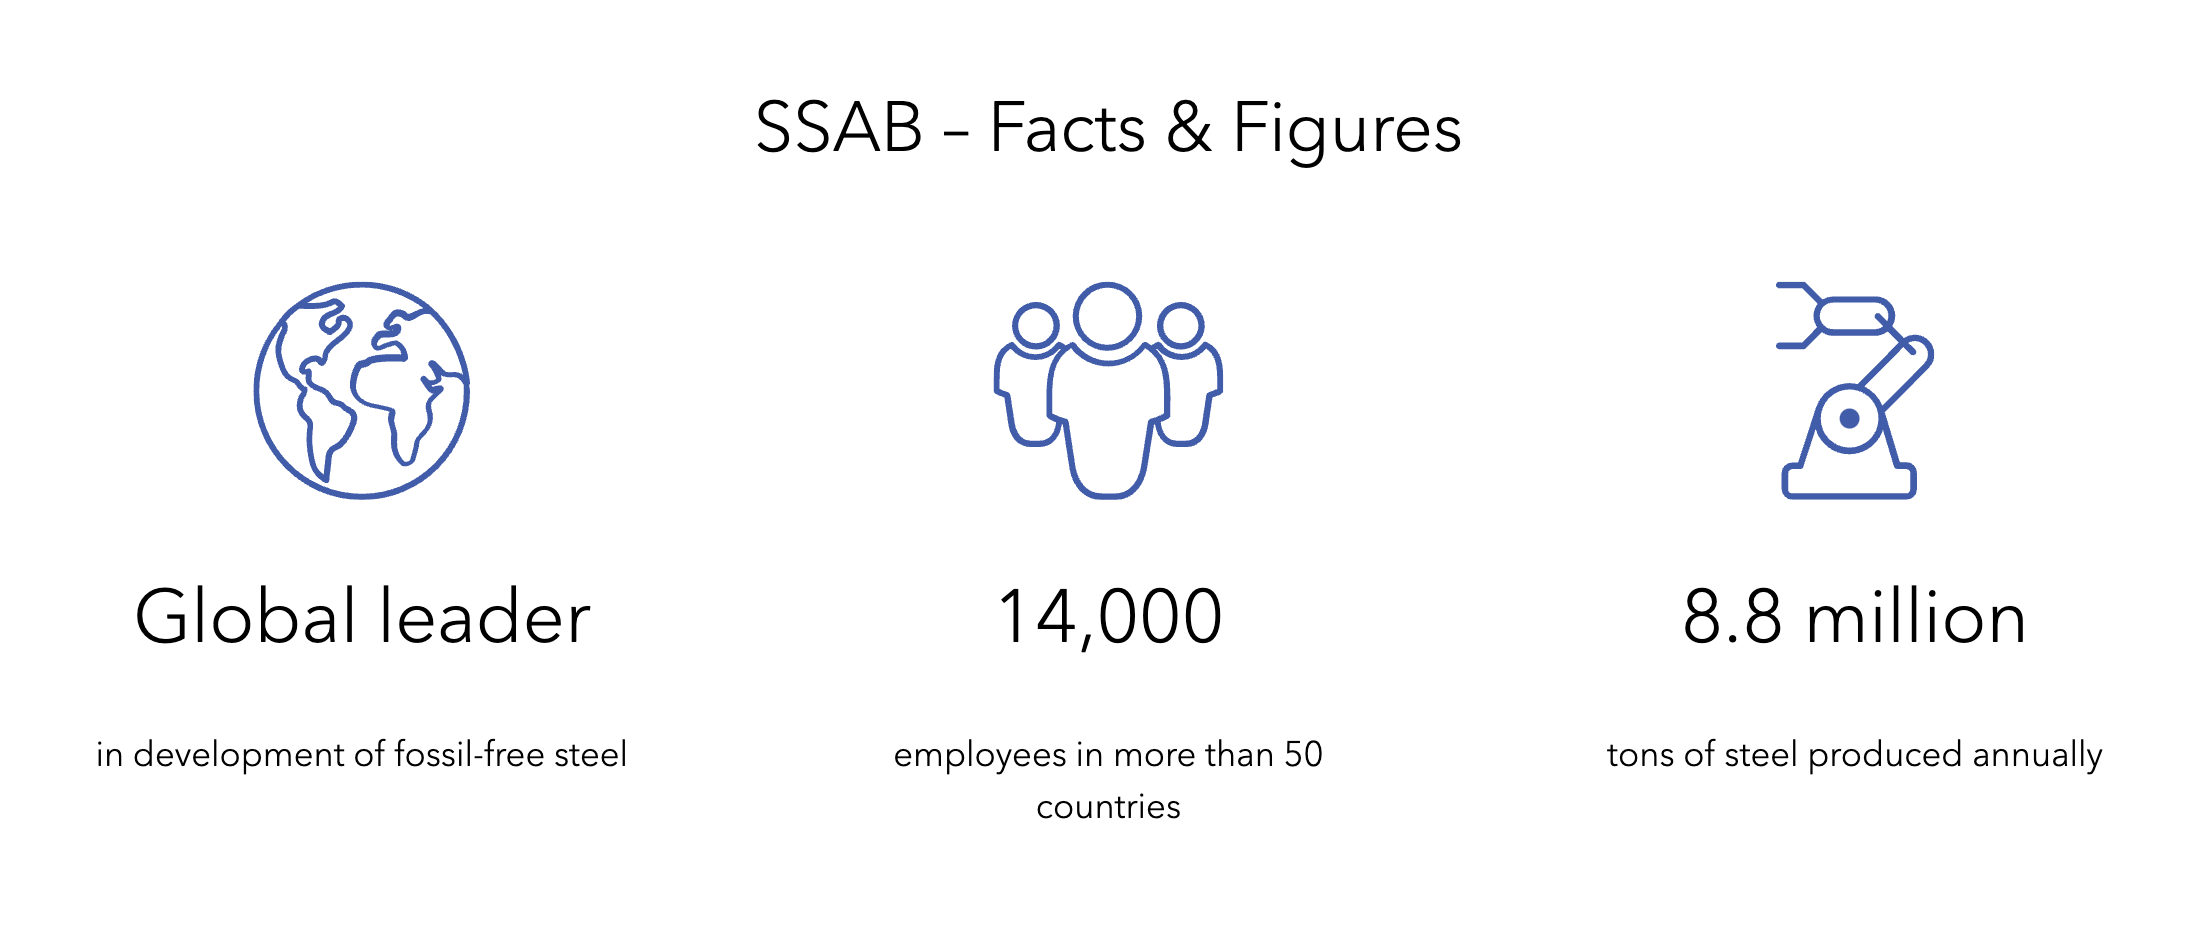 ssab facts & figures